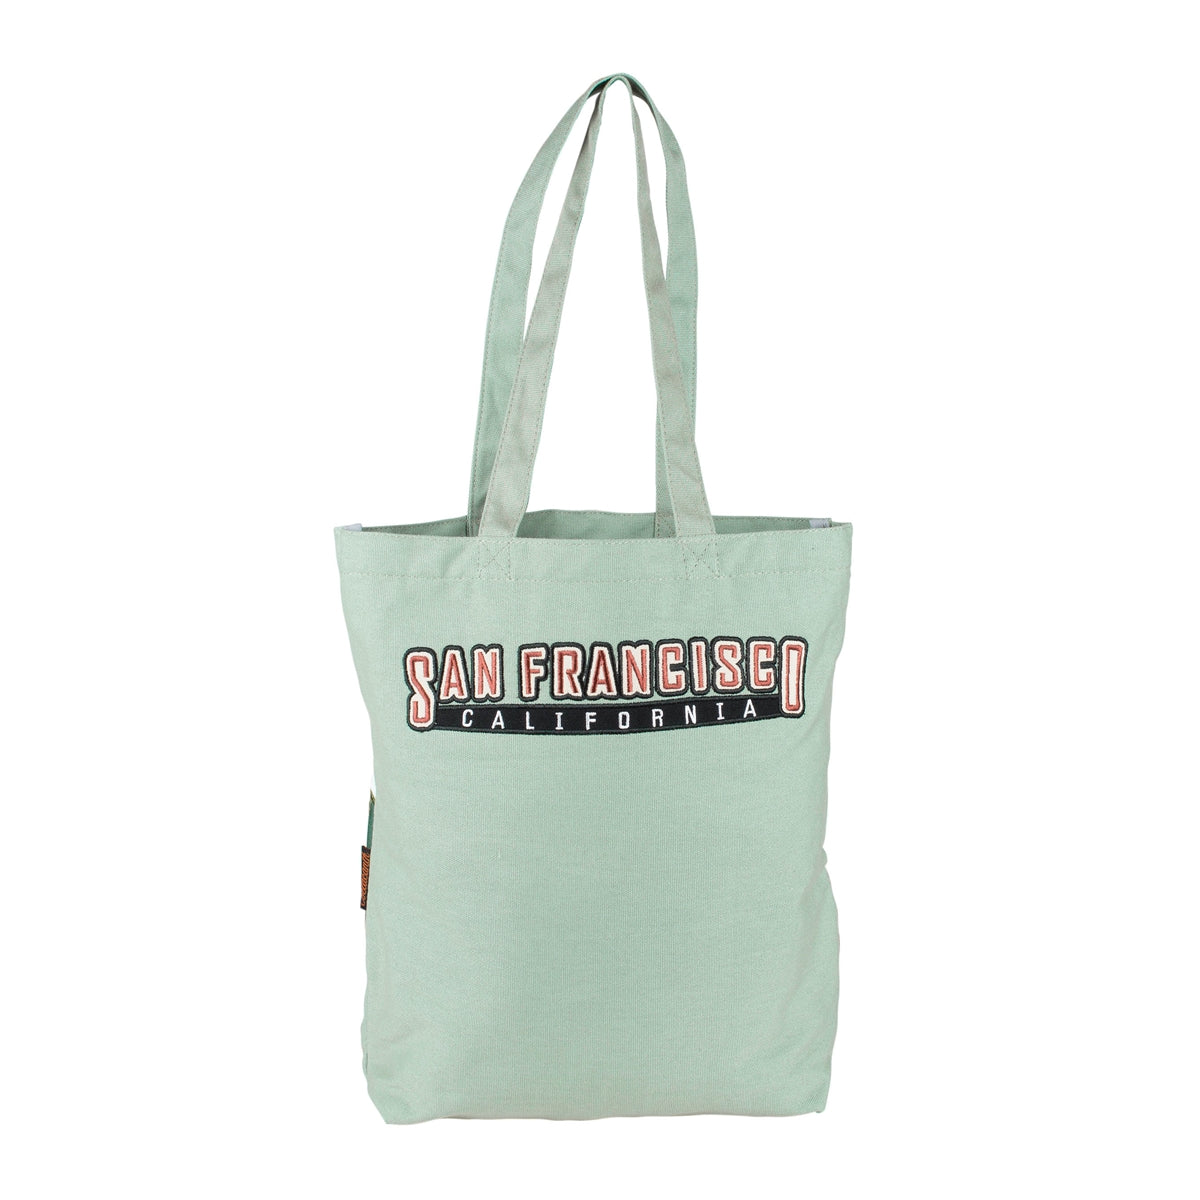 Pale green tote bag with embroidered text "San Francisco California" in red, white, and black.